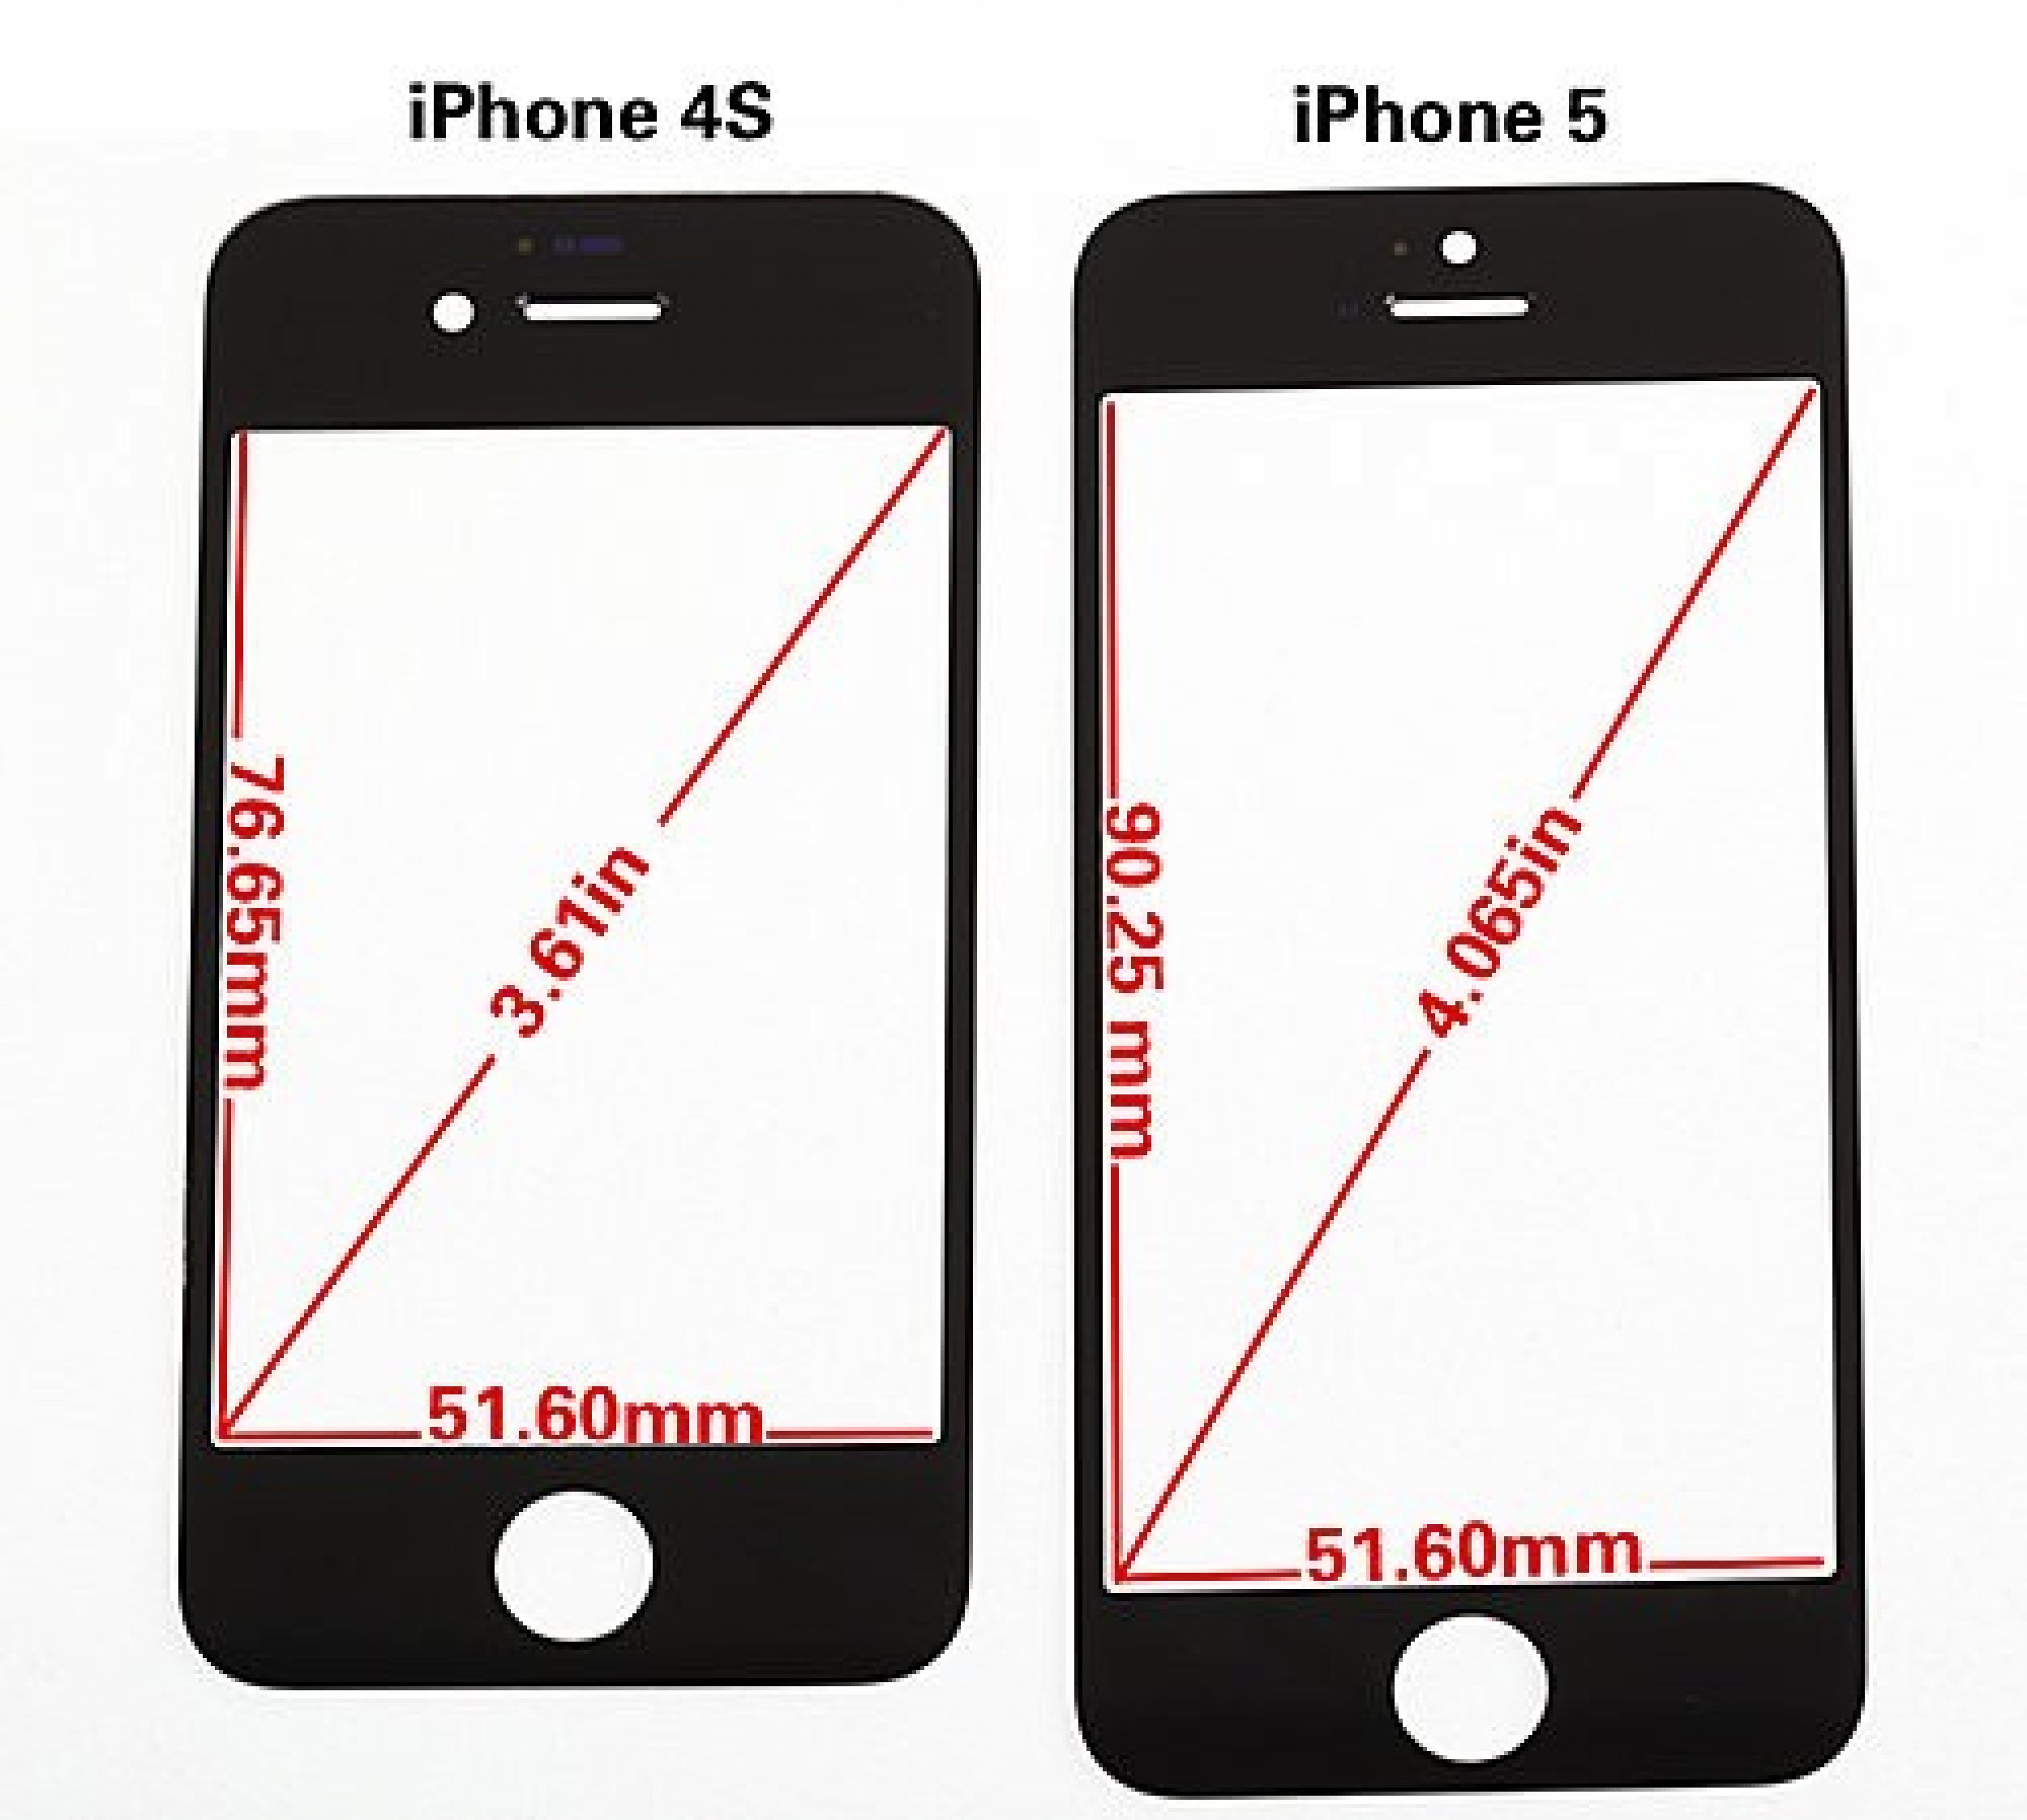 Apple iPhone 5 Specs Most Convincing Photo Evidence Yet Showcases Different Features From iPhone 4S PICTURES, VIDEO